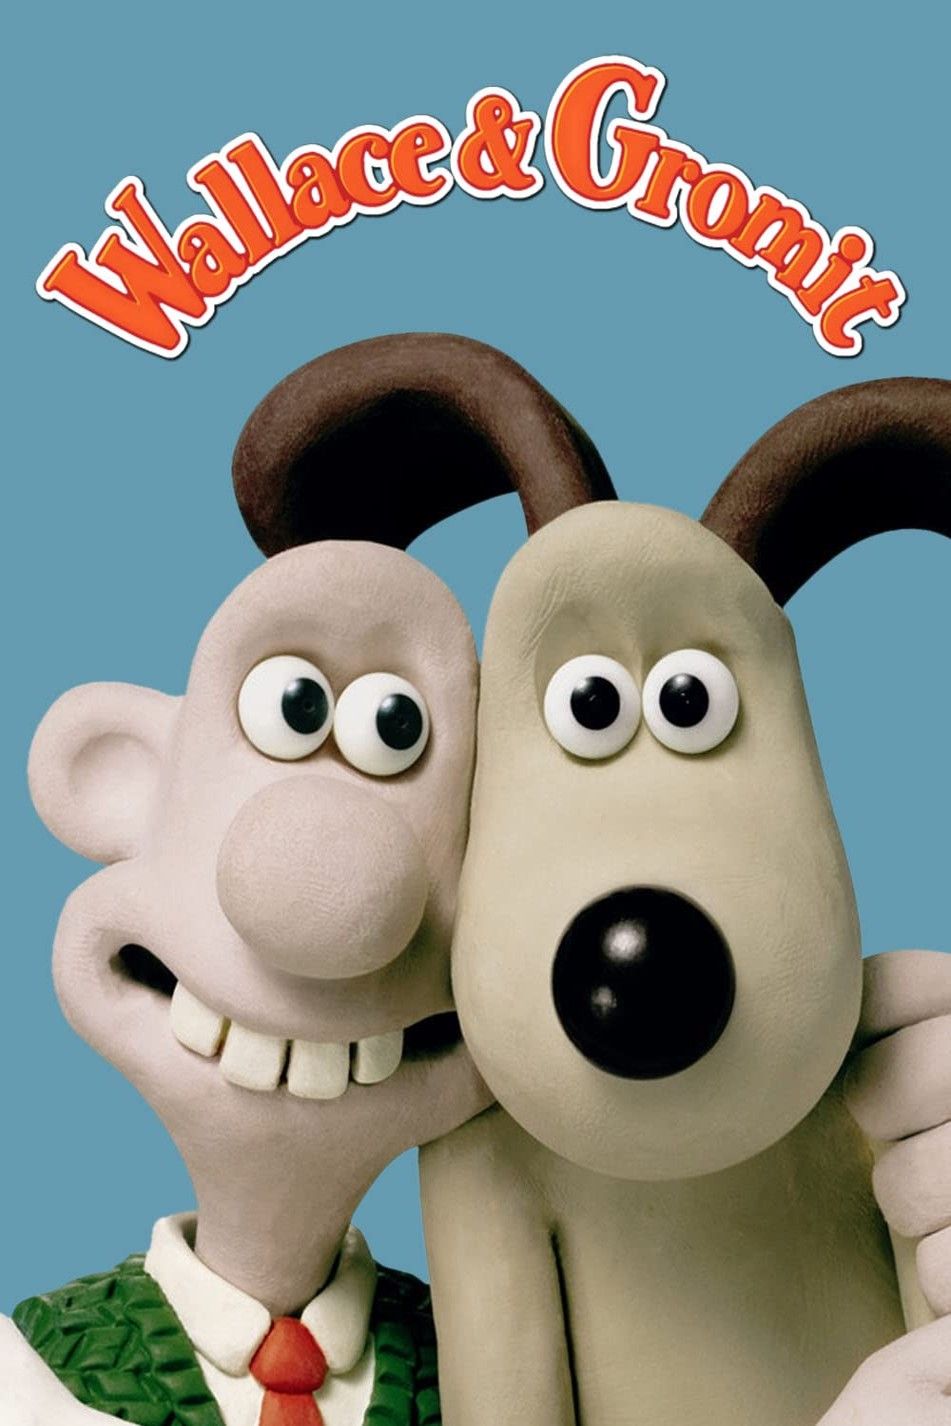 Wallace and Gromit Franchise Poster